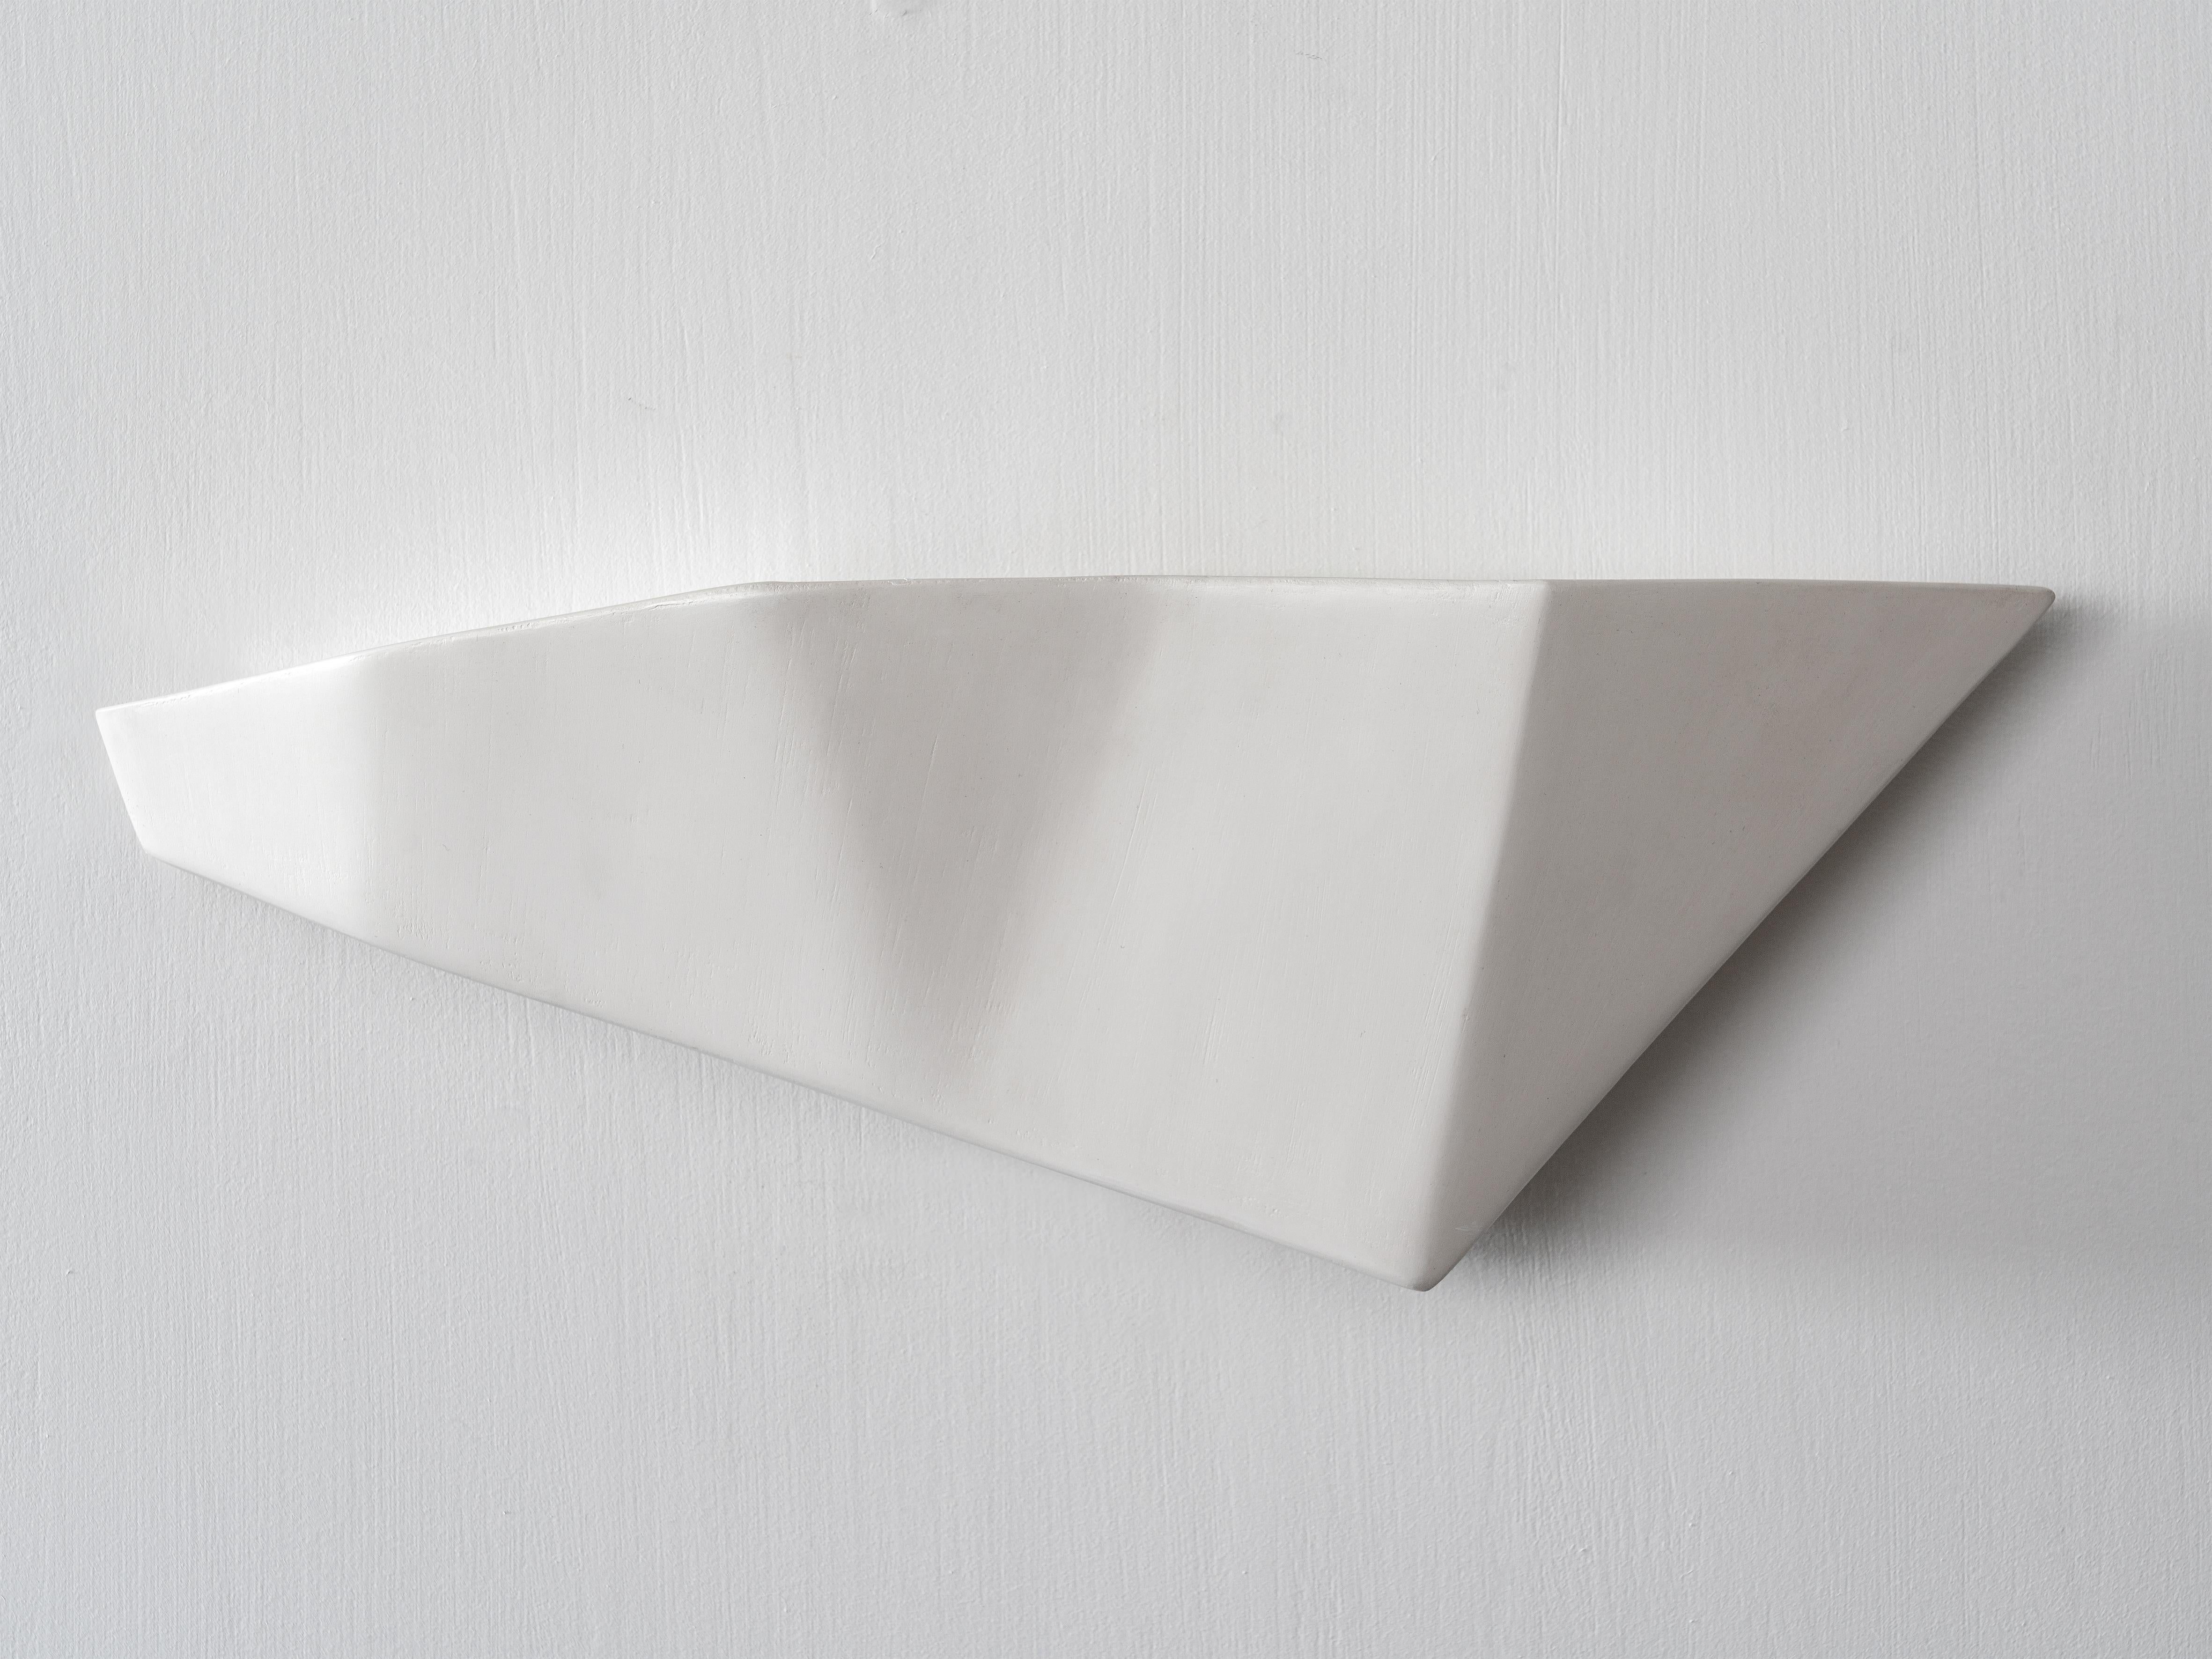 German Constance Contemporary Wall Sconce, Wall Light in White Plaster Finish, Benediko For Sale